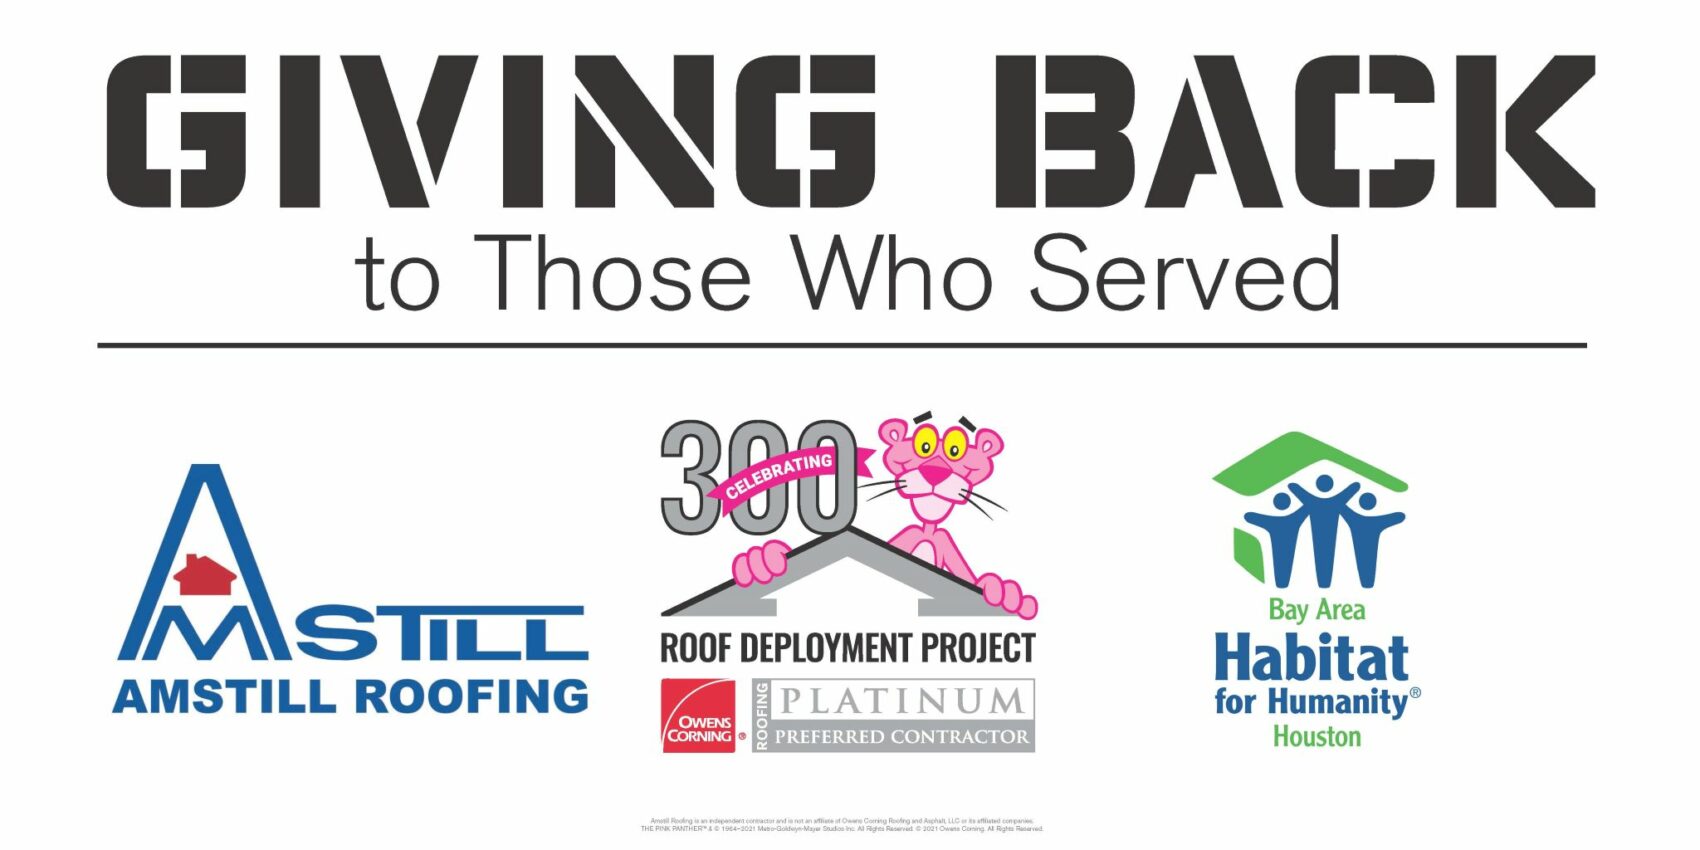 "Giving back to those who served - Amstill Roofing, Owens Corning, Bay Area Habitat.